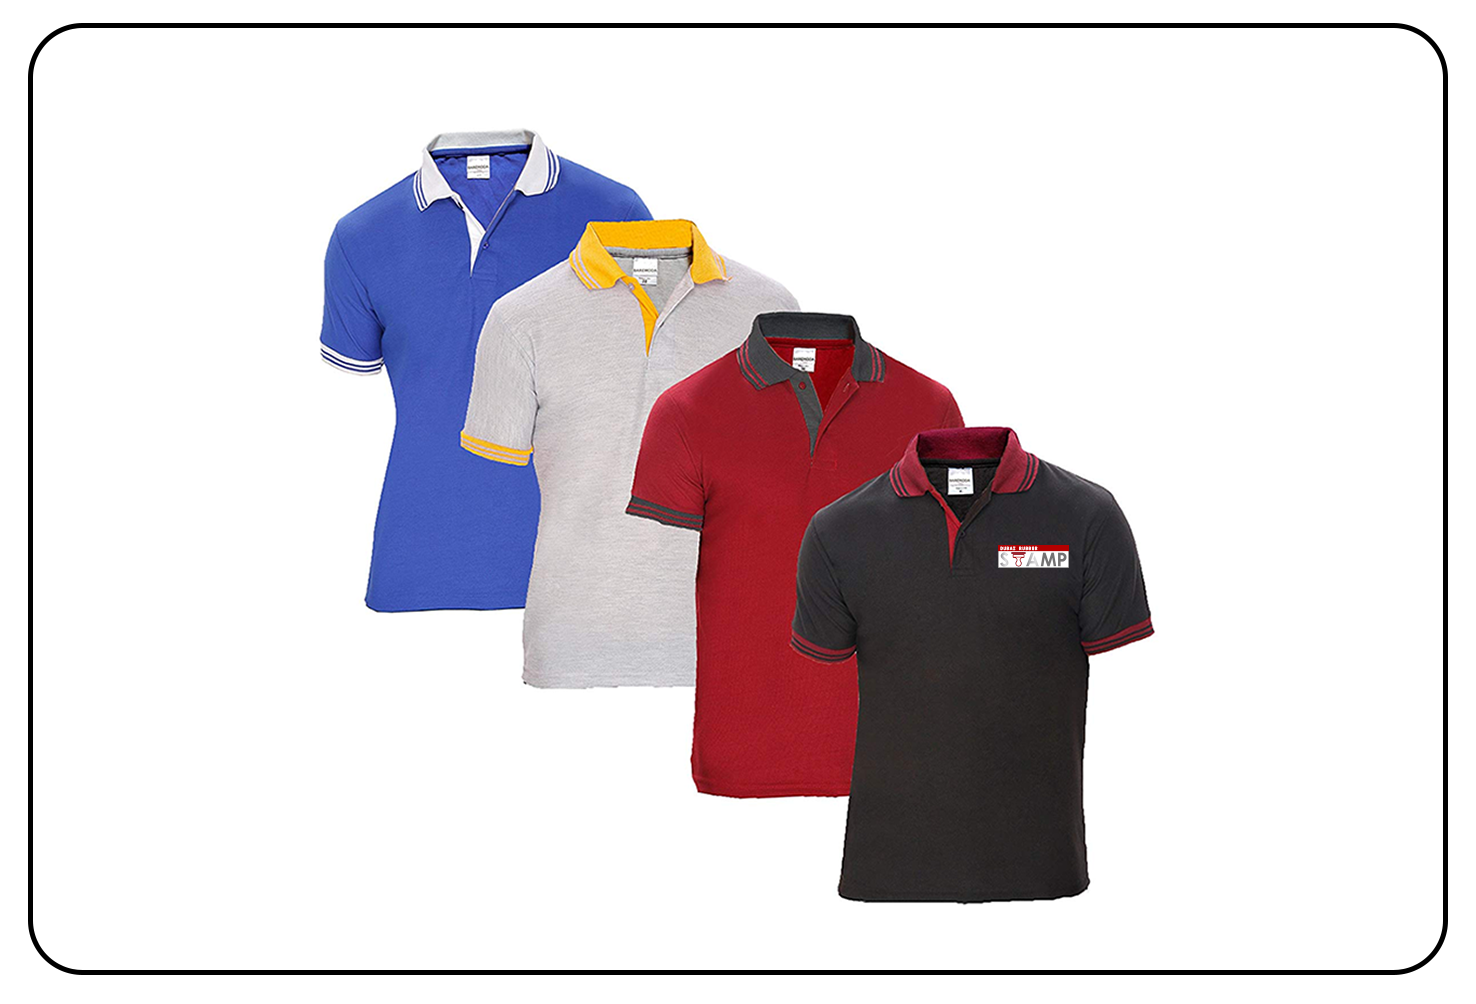 Personalized polo T-shirt printing for fashionable comfort.